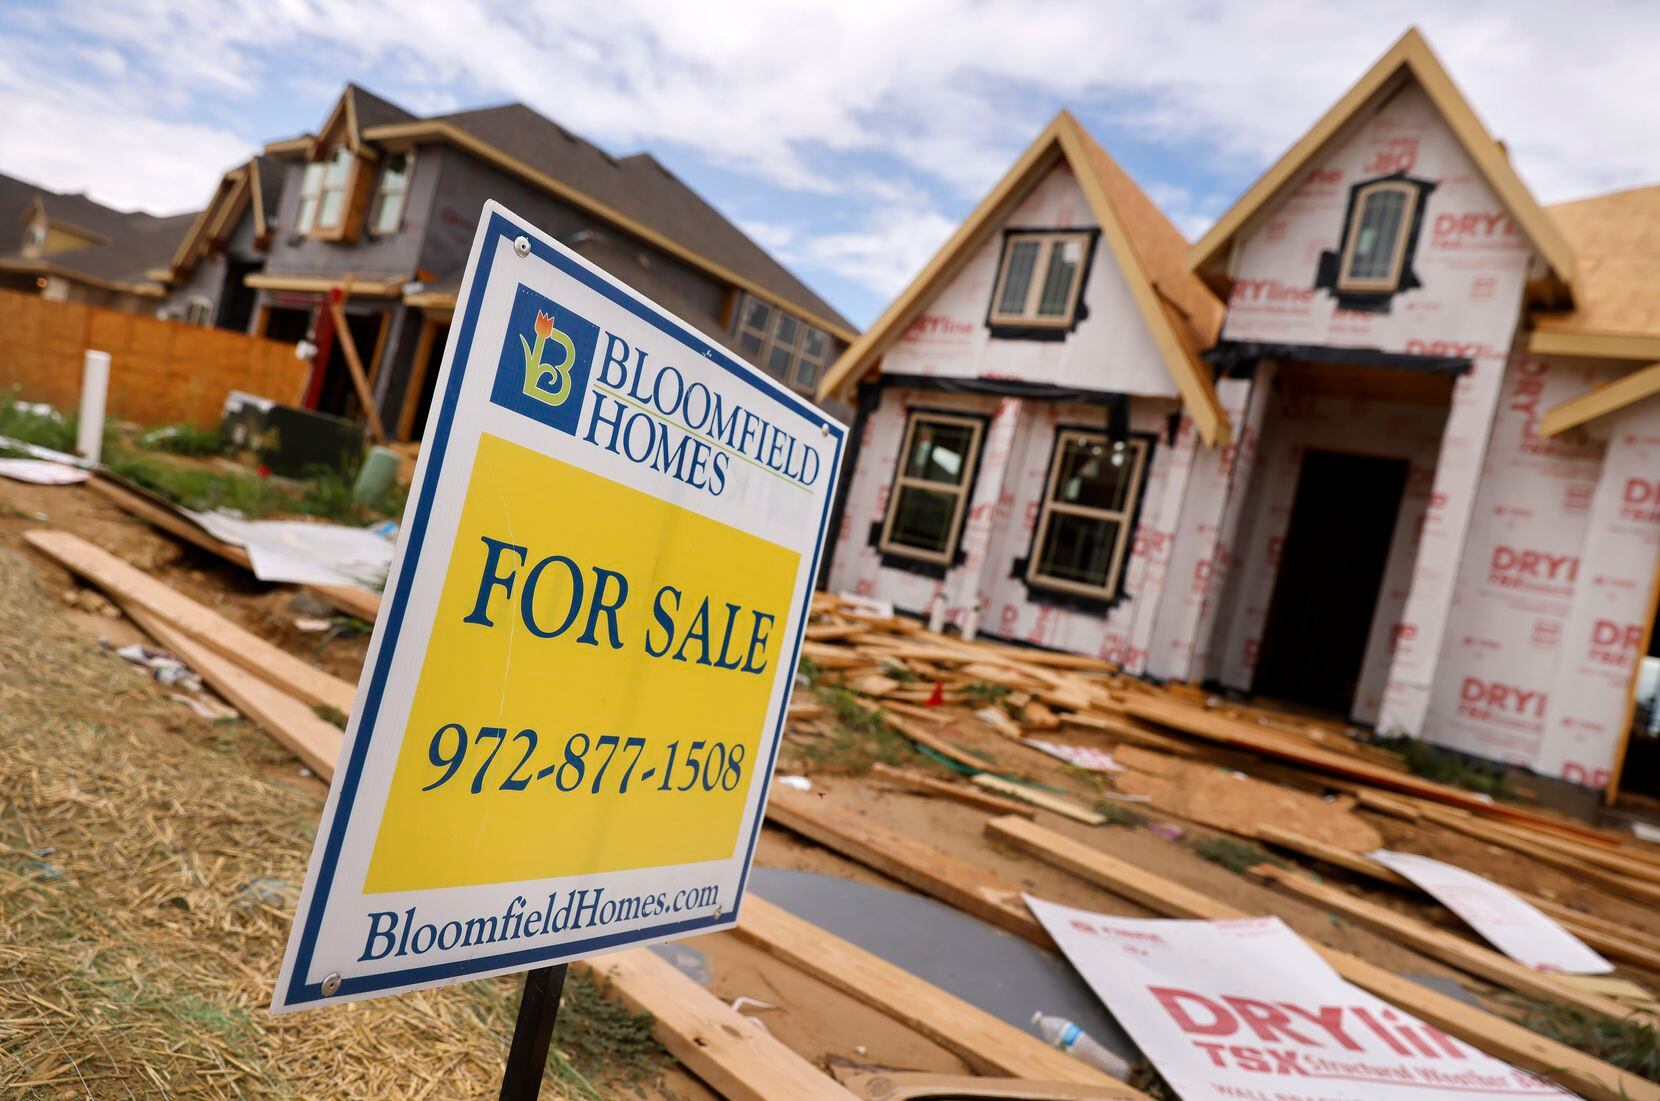 Builders have slashed new home starts as higher mortgage rates sidelined many potential buyers.